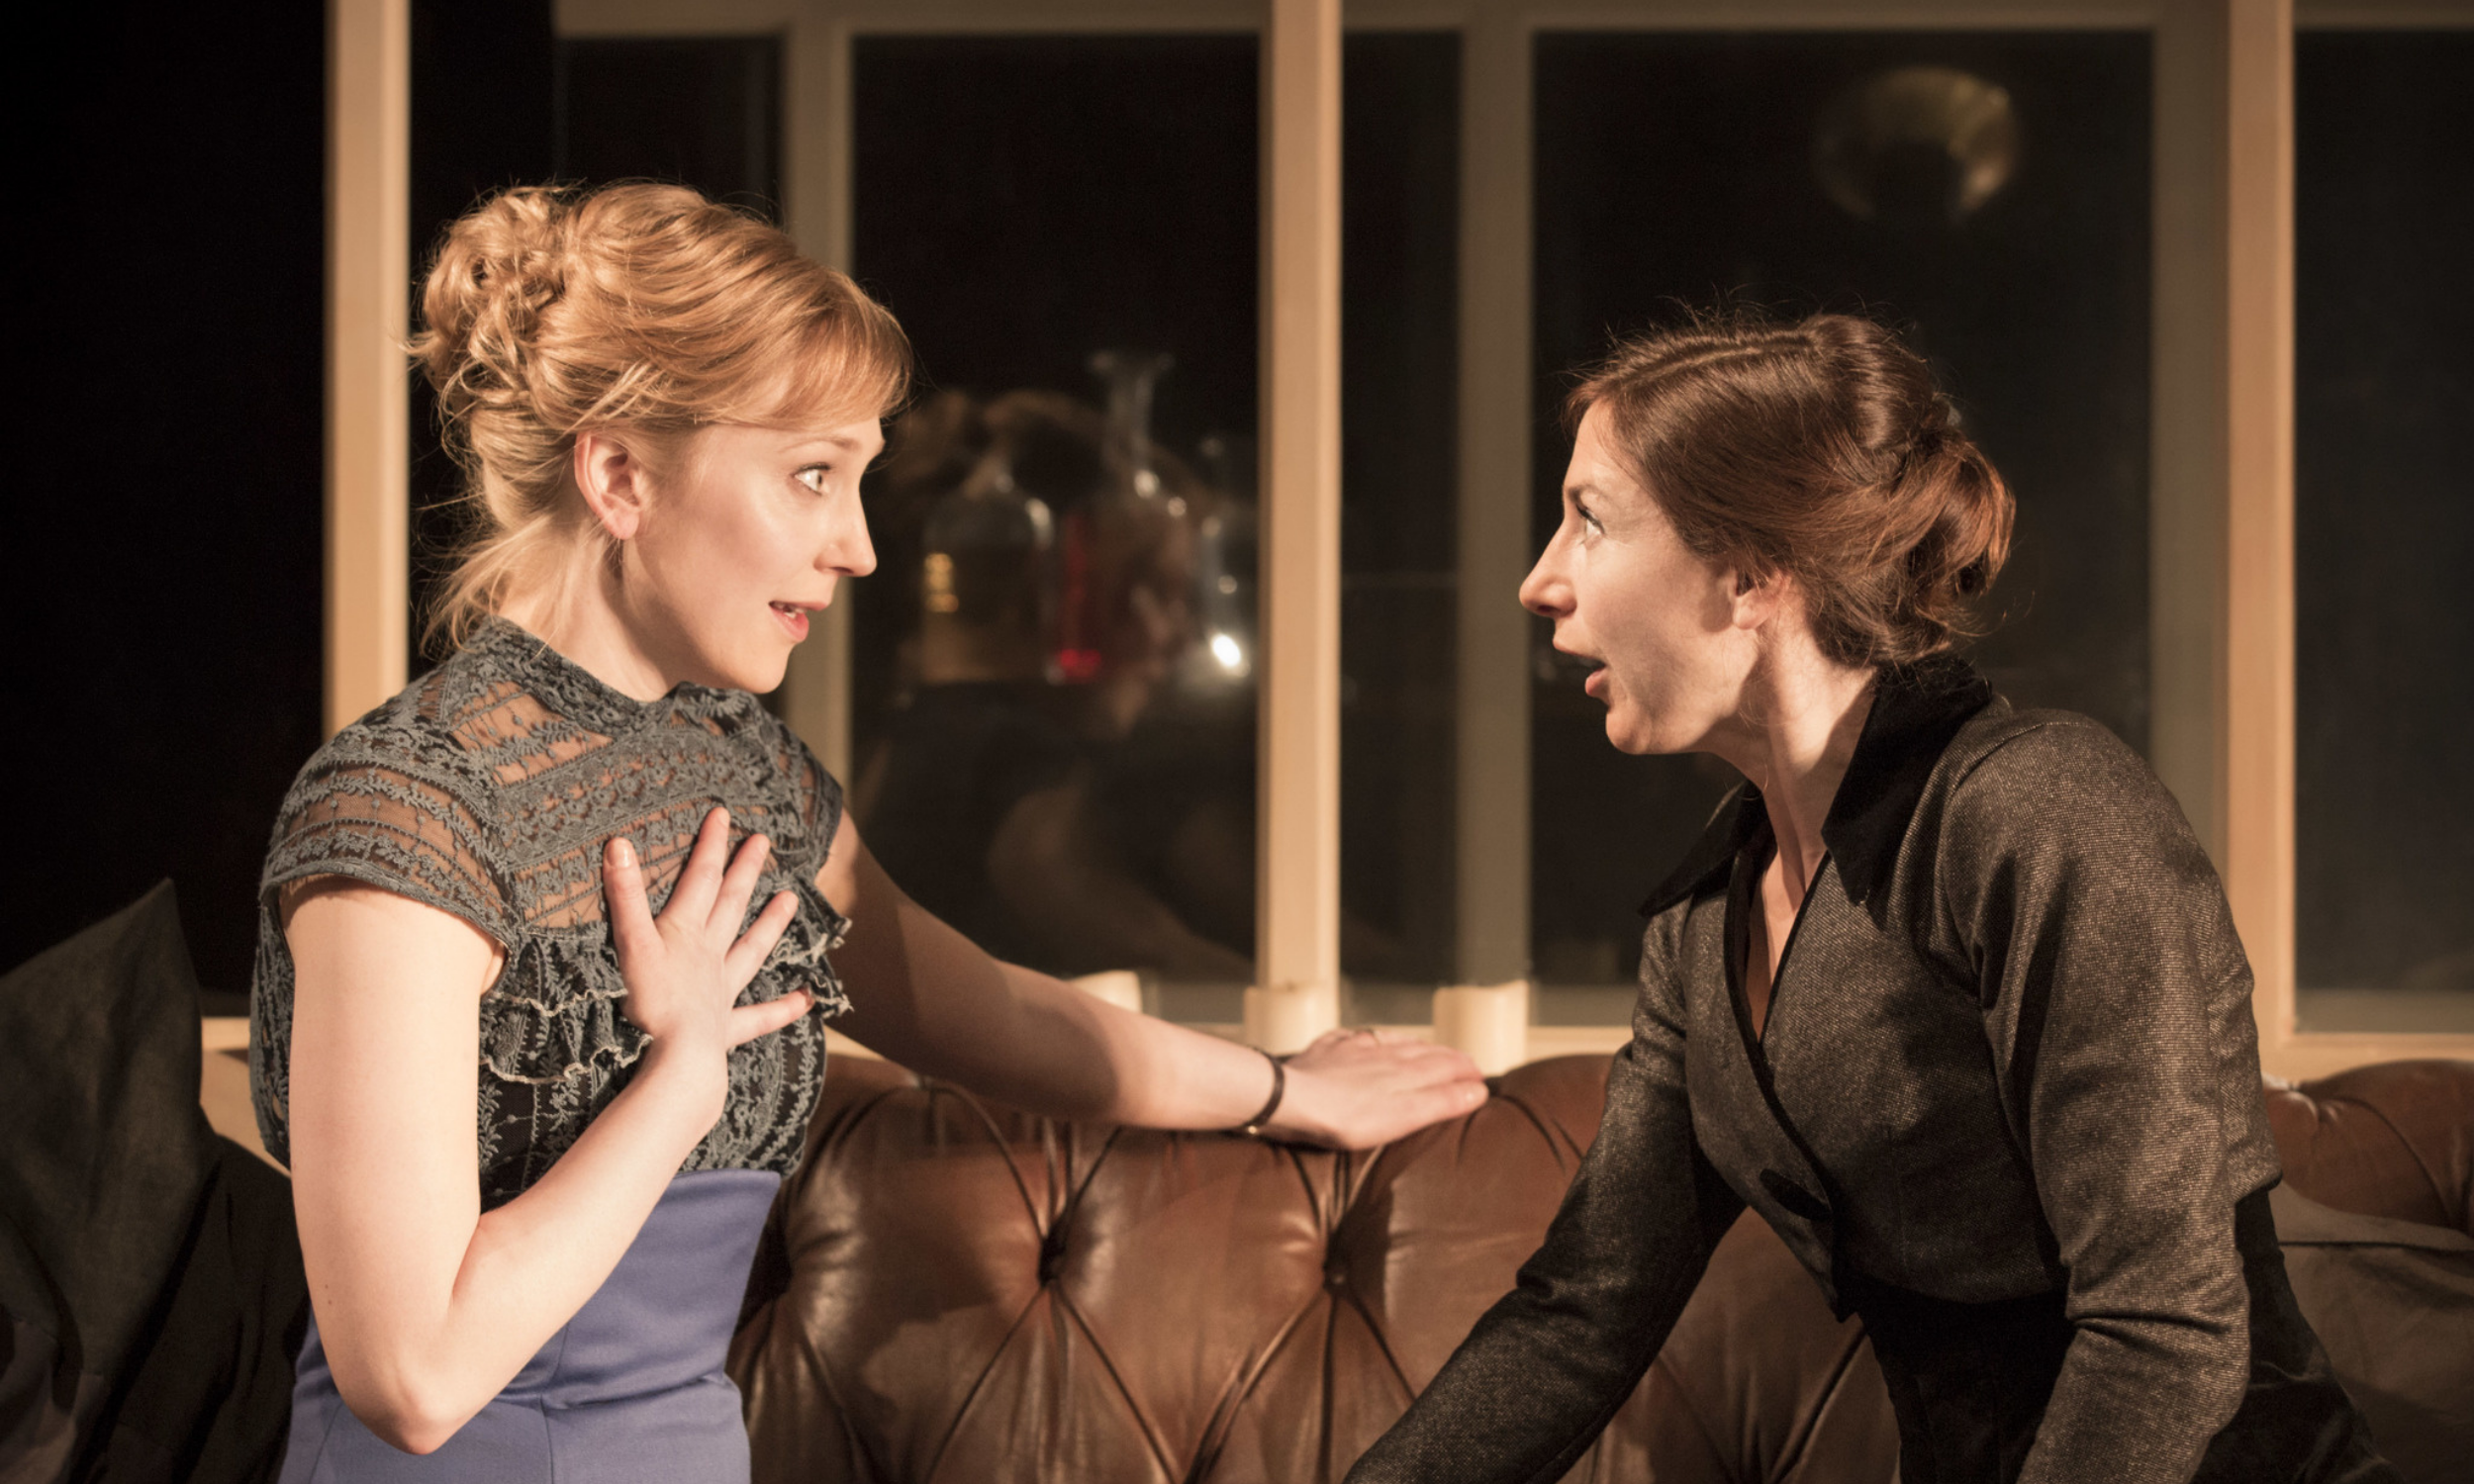  Hattie Morahan (Nora) and Susannah Wise (Kristine Linde) look at each other in shock in the Young Vic's A Doll's House © Johan Persson